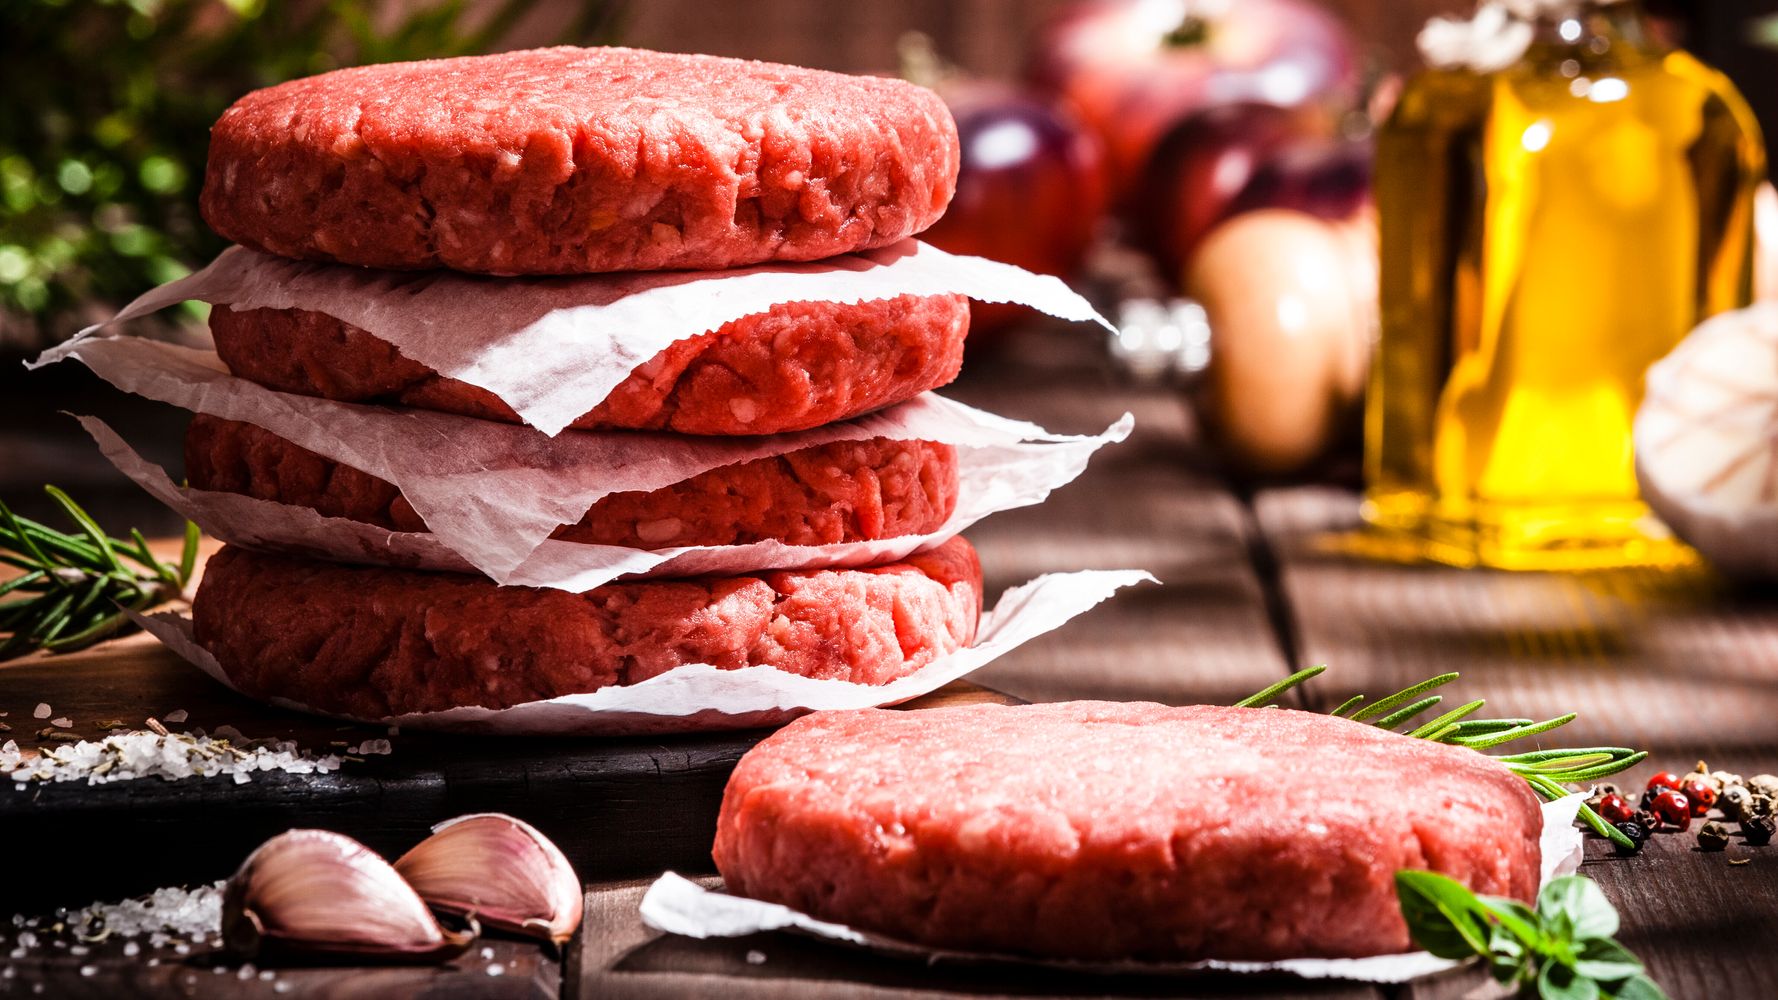 The Best Ground-Beef-To-Fat Ratio For A Perfect Burger